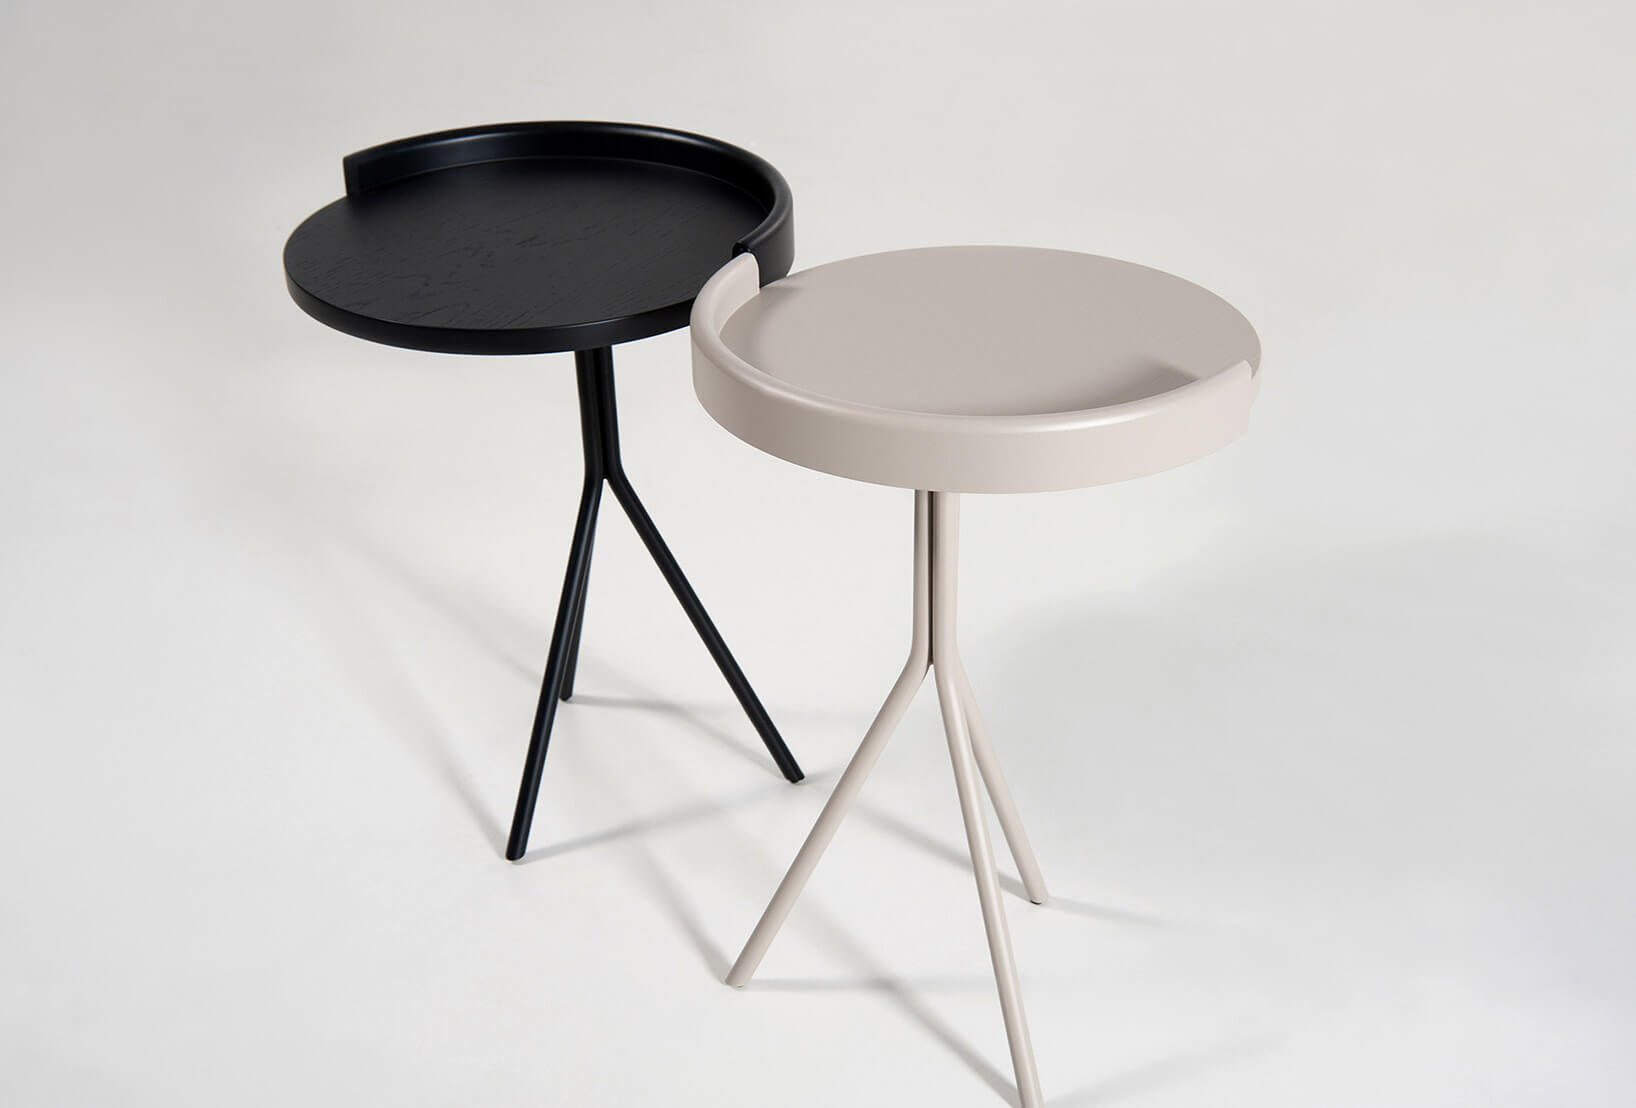 E-klipse side tables in beige and black lacquer